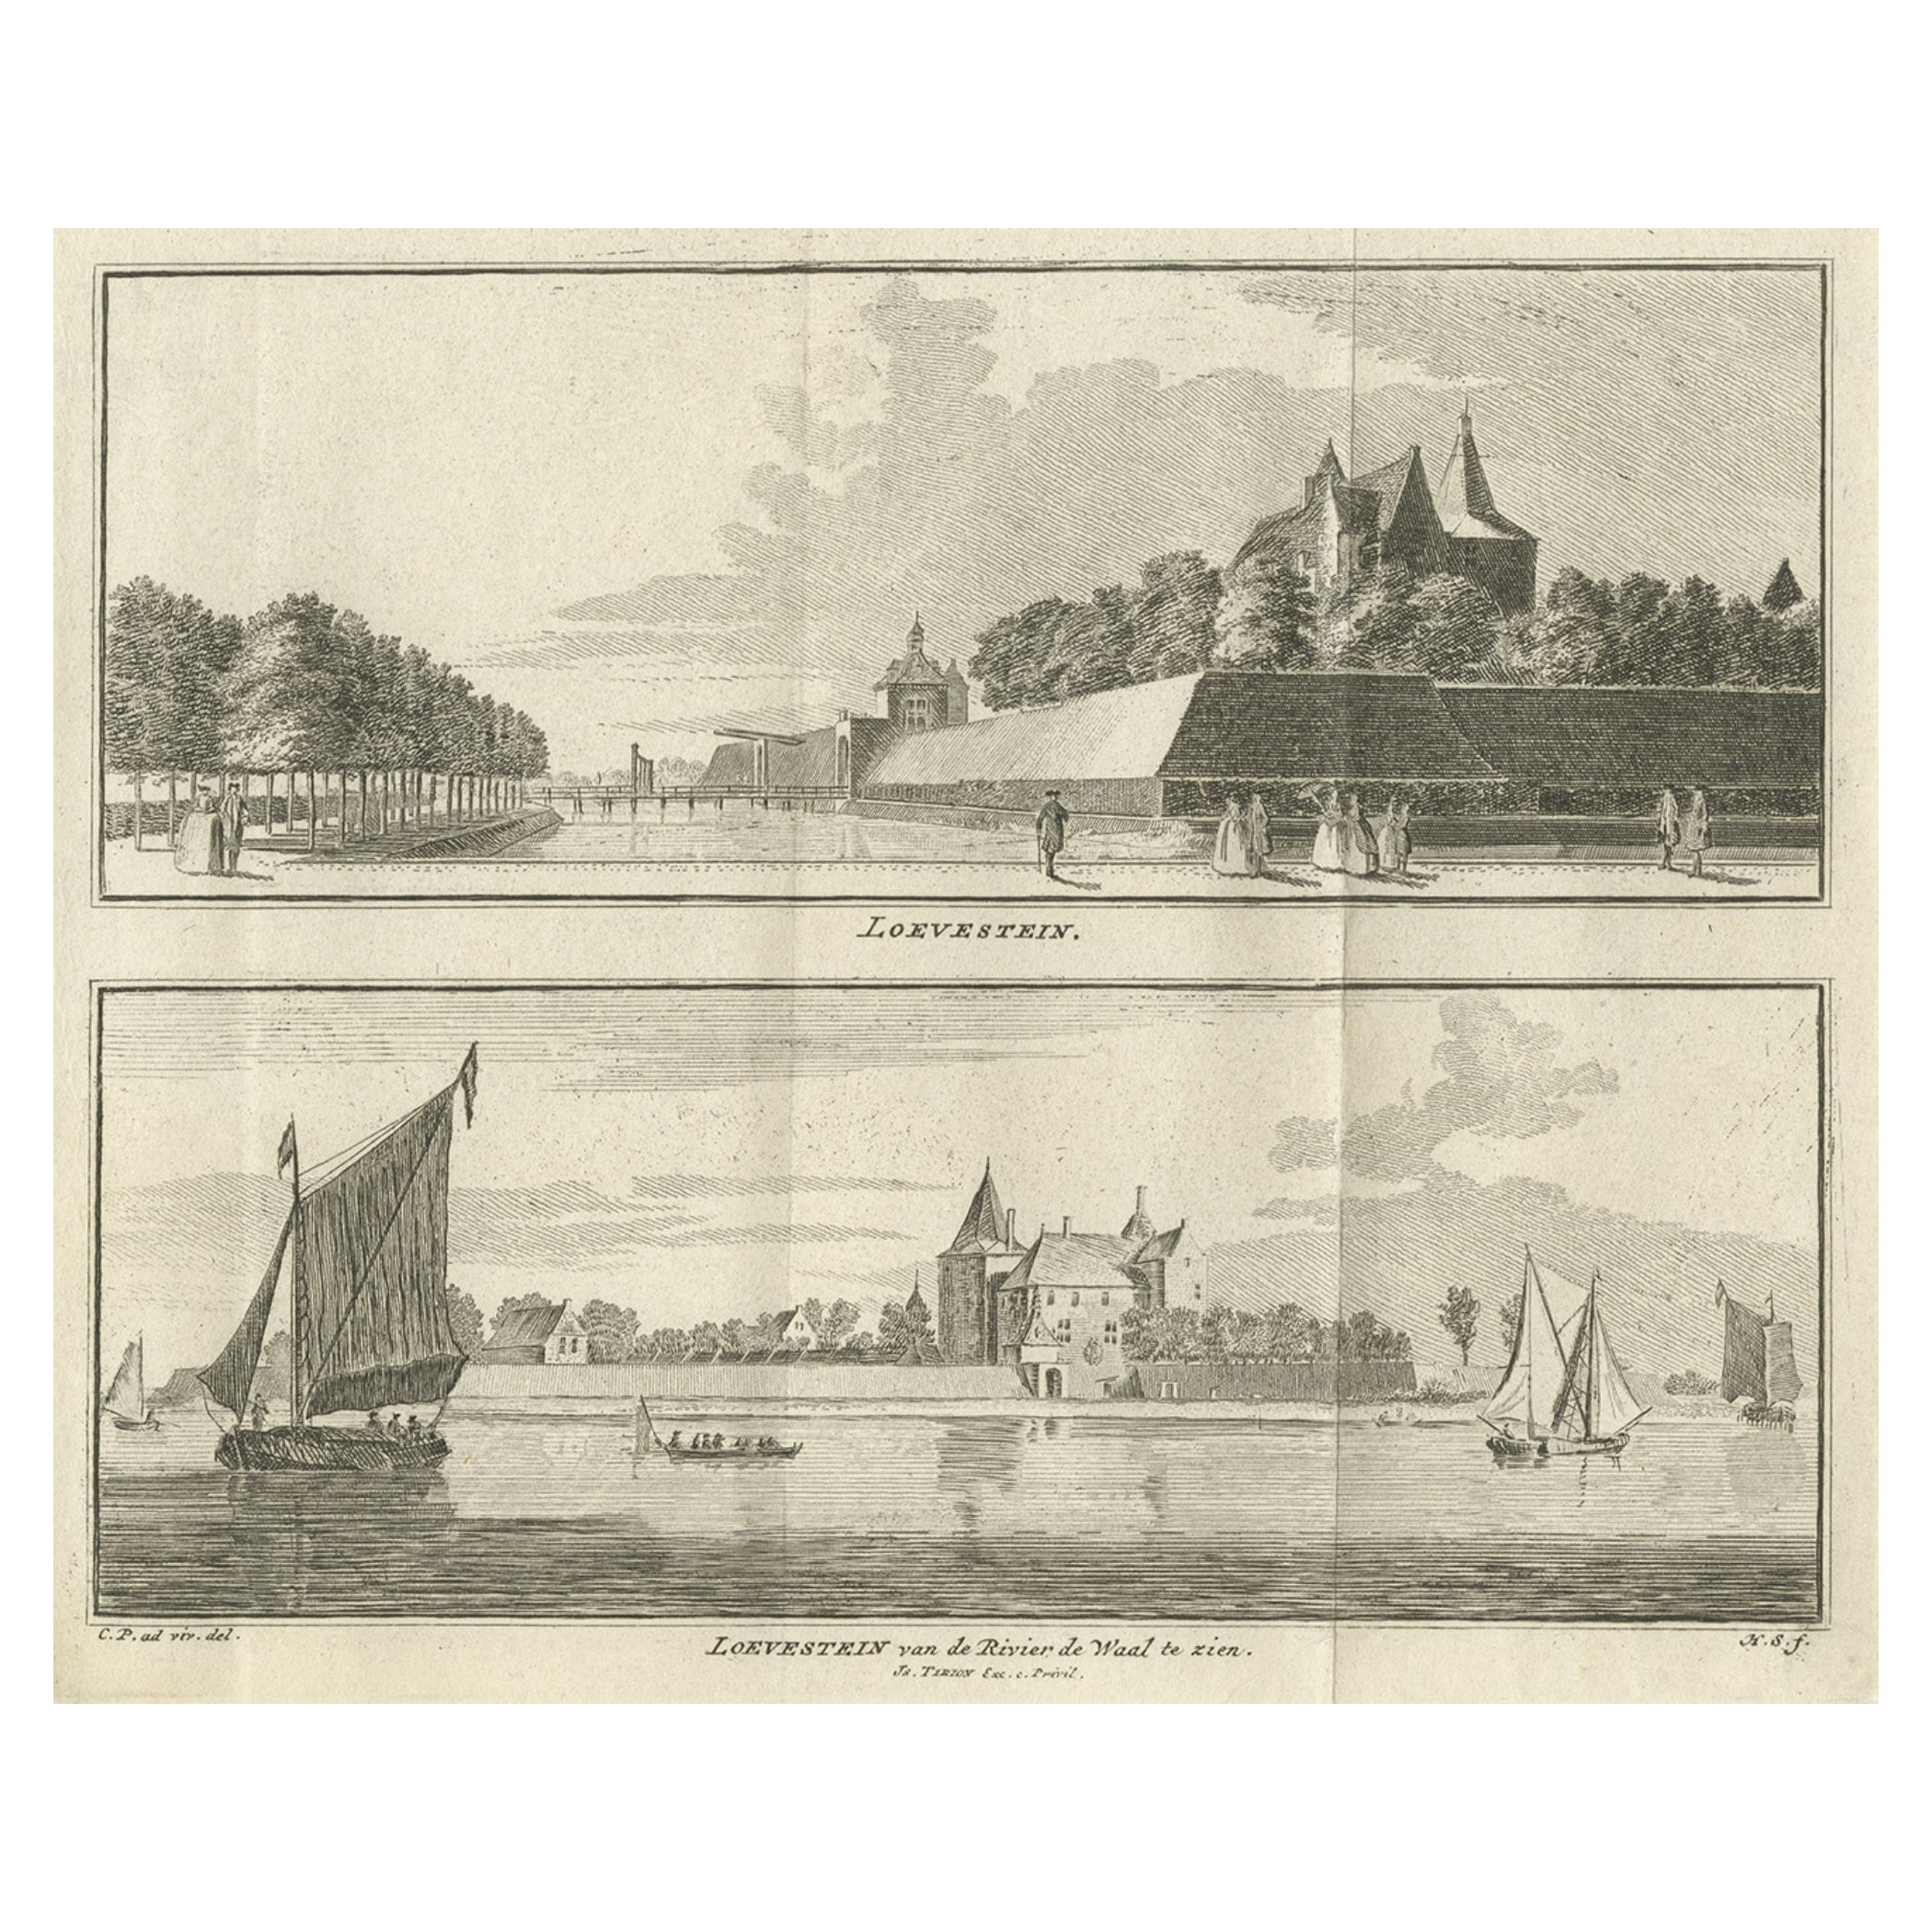 Antique Print of Loevestein Castle by Tirion, 1749